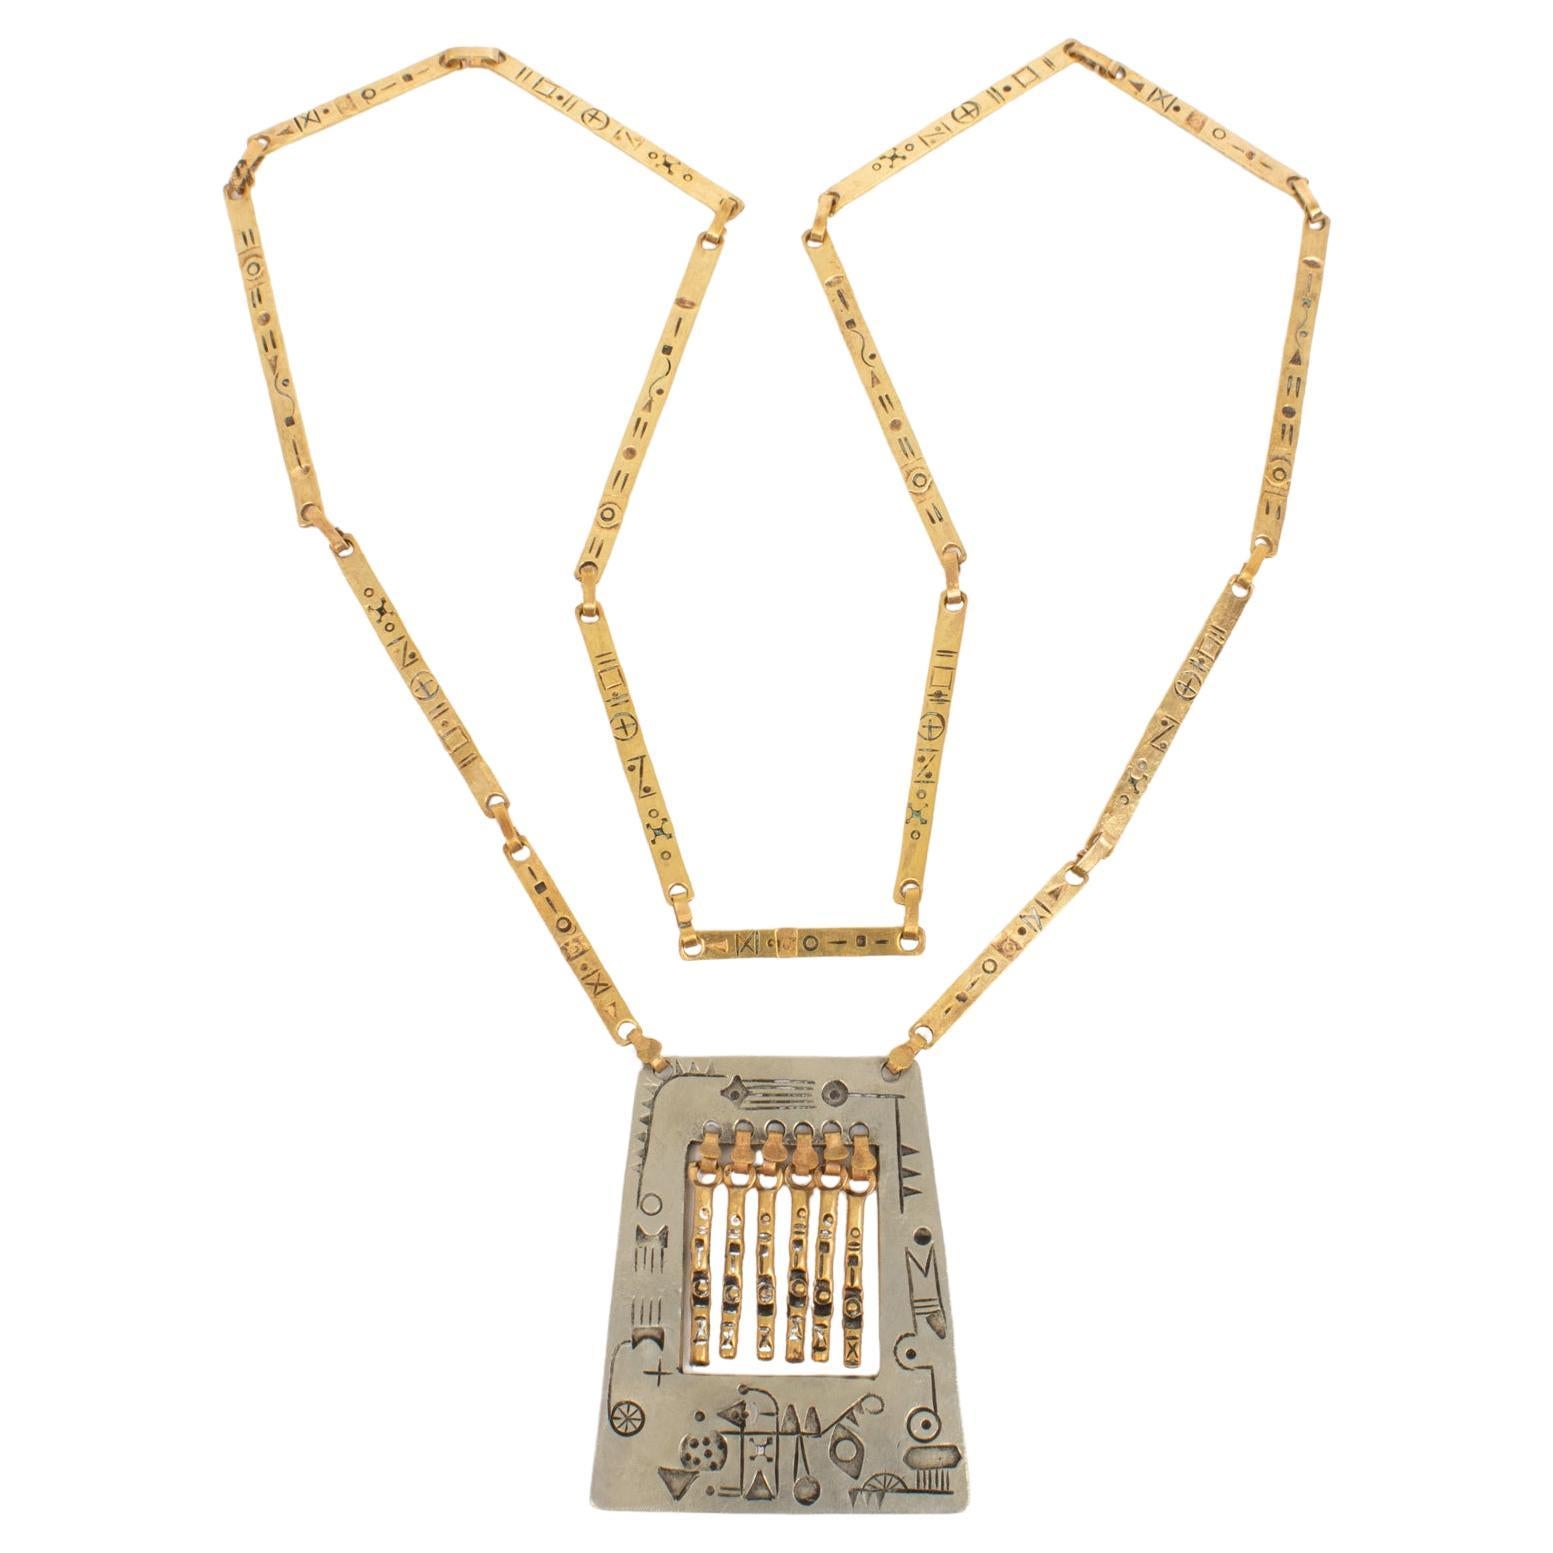 Modernist Brass and Silvered Metal Hieroglyph or Ethnic Graffiti Necklace, 1960s For Sale